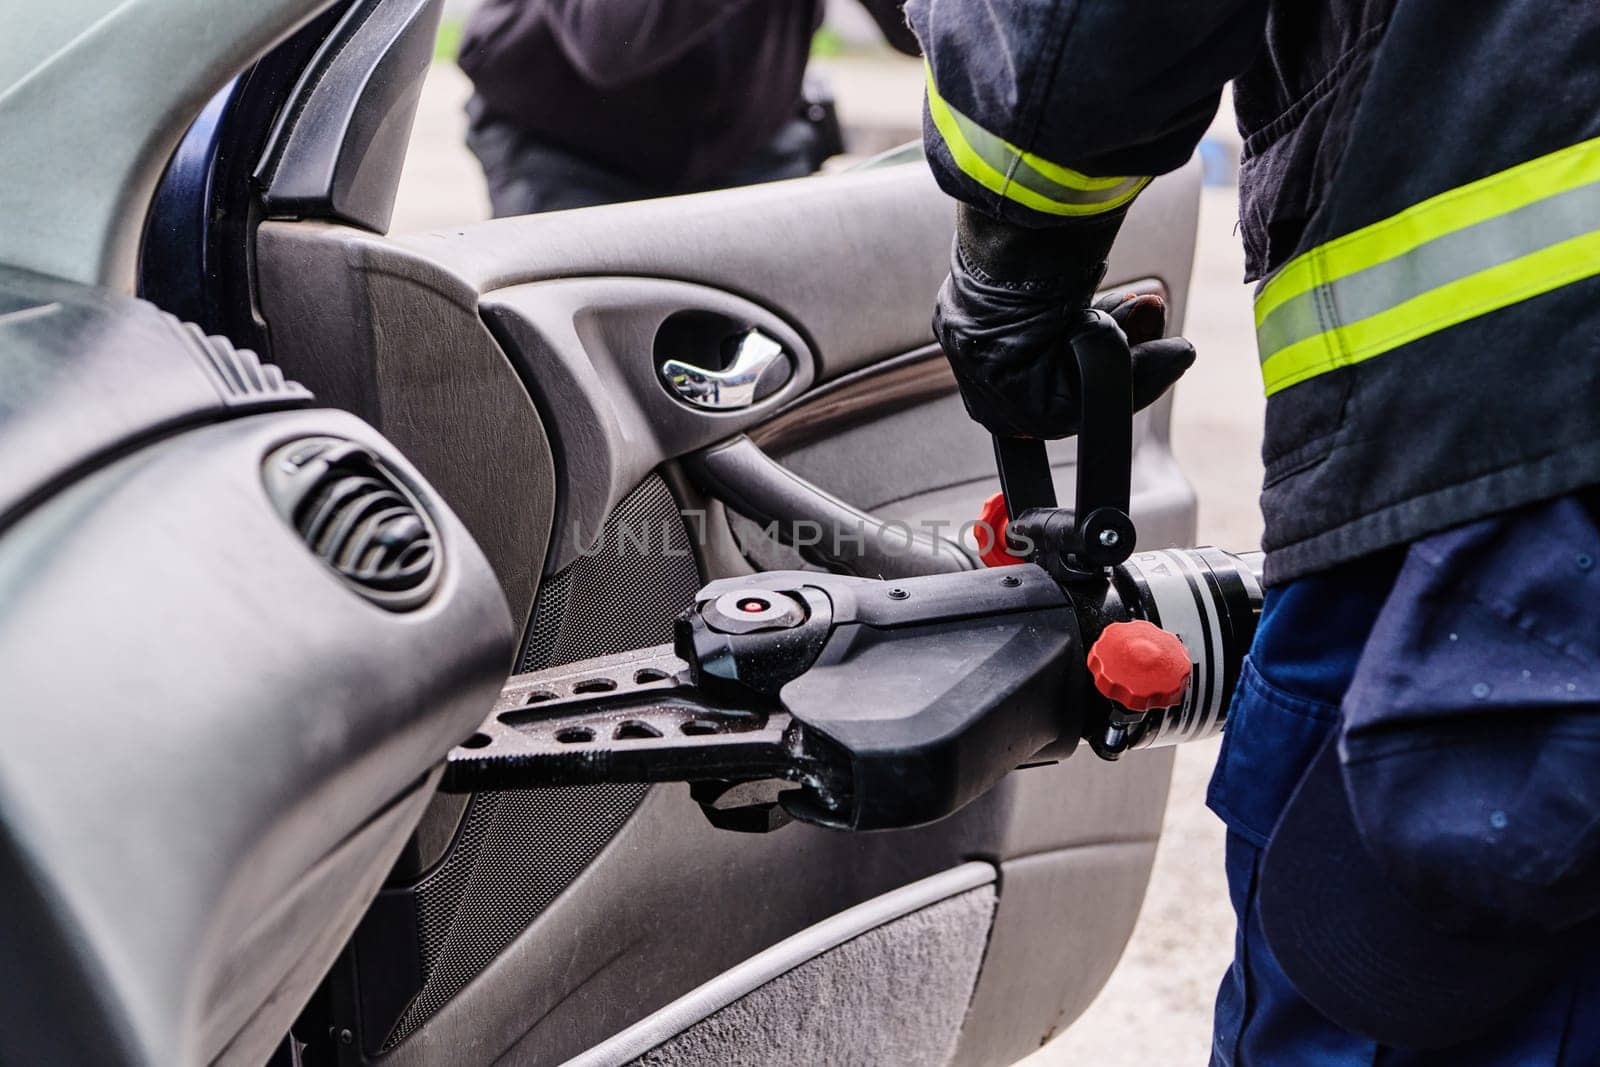 A dedicated team of professional firefighters employs specialized tools to cut and break through vehicle wreckage, showcasing their skilled collaboration and swift response in rescuing individuals involved in a car accident.